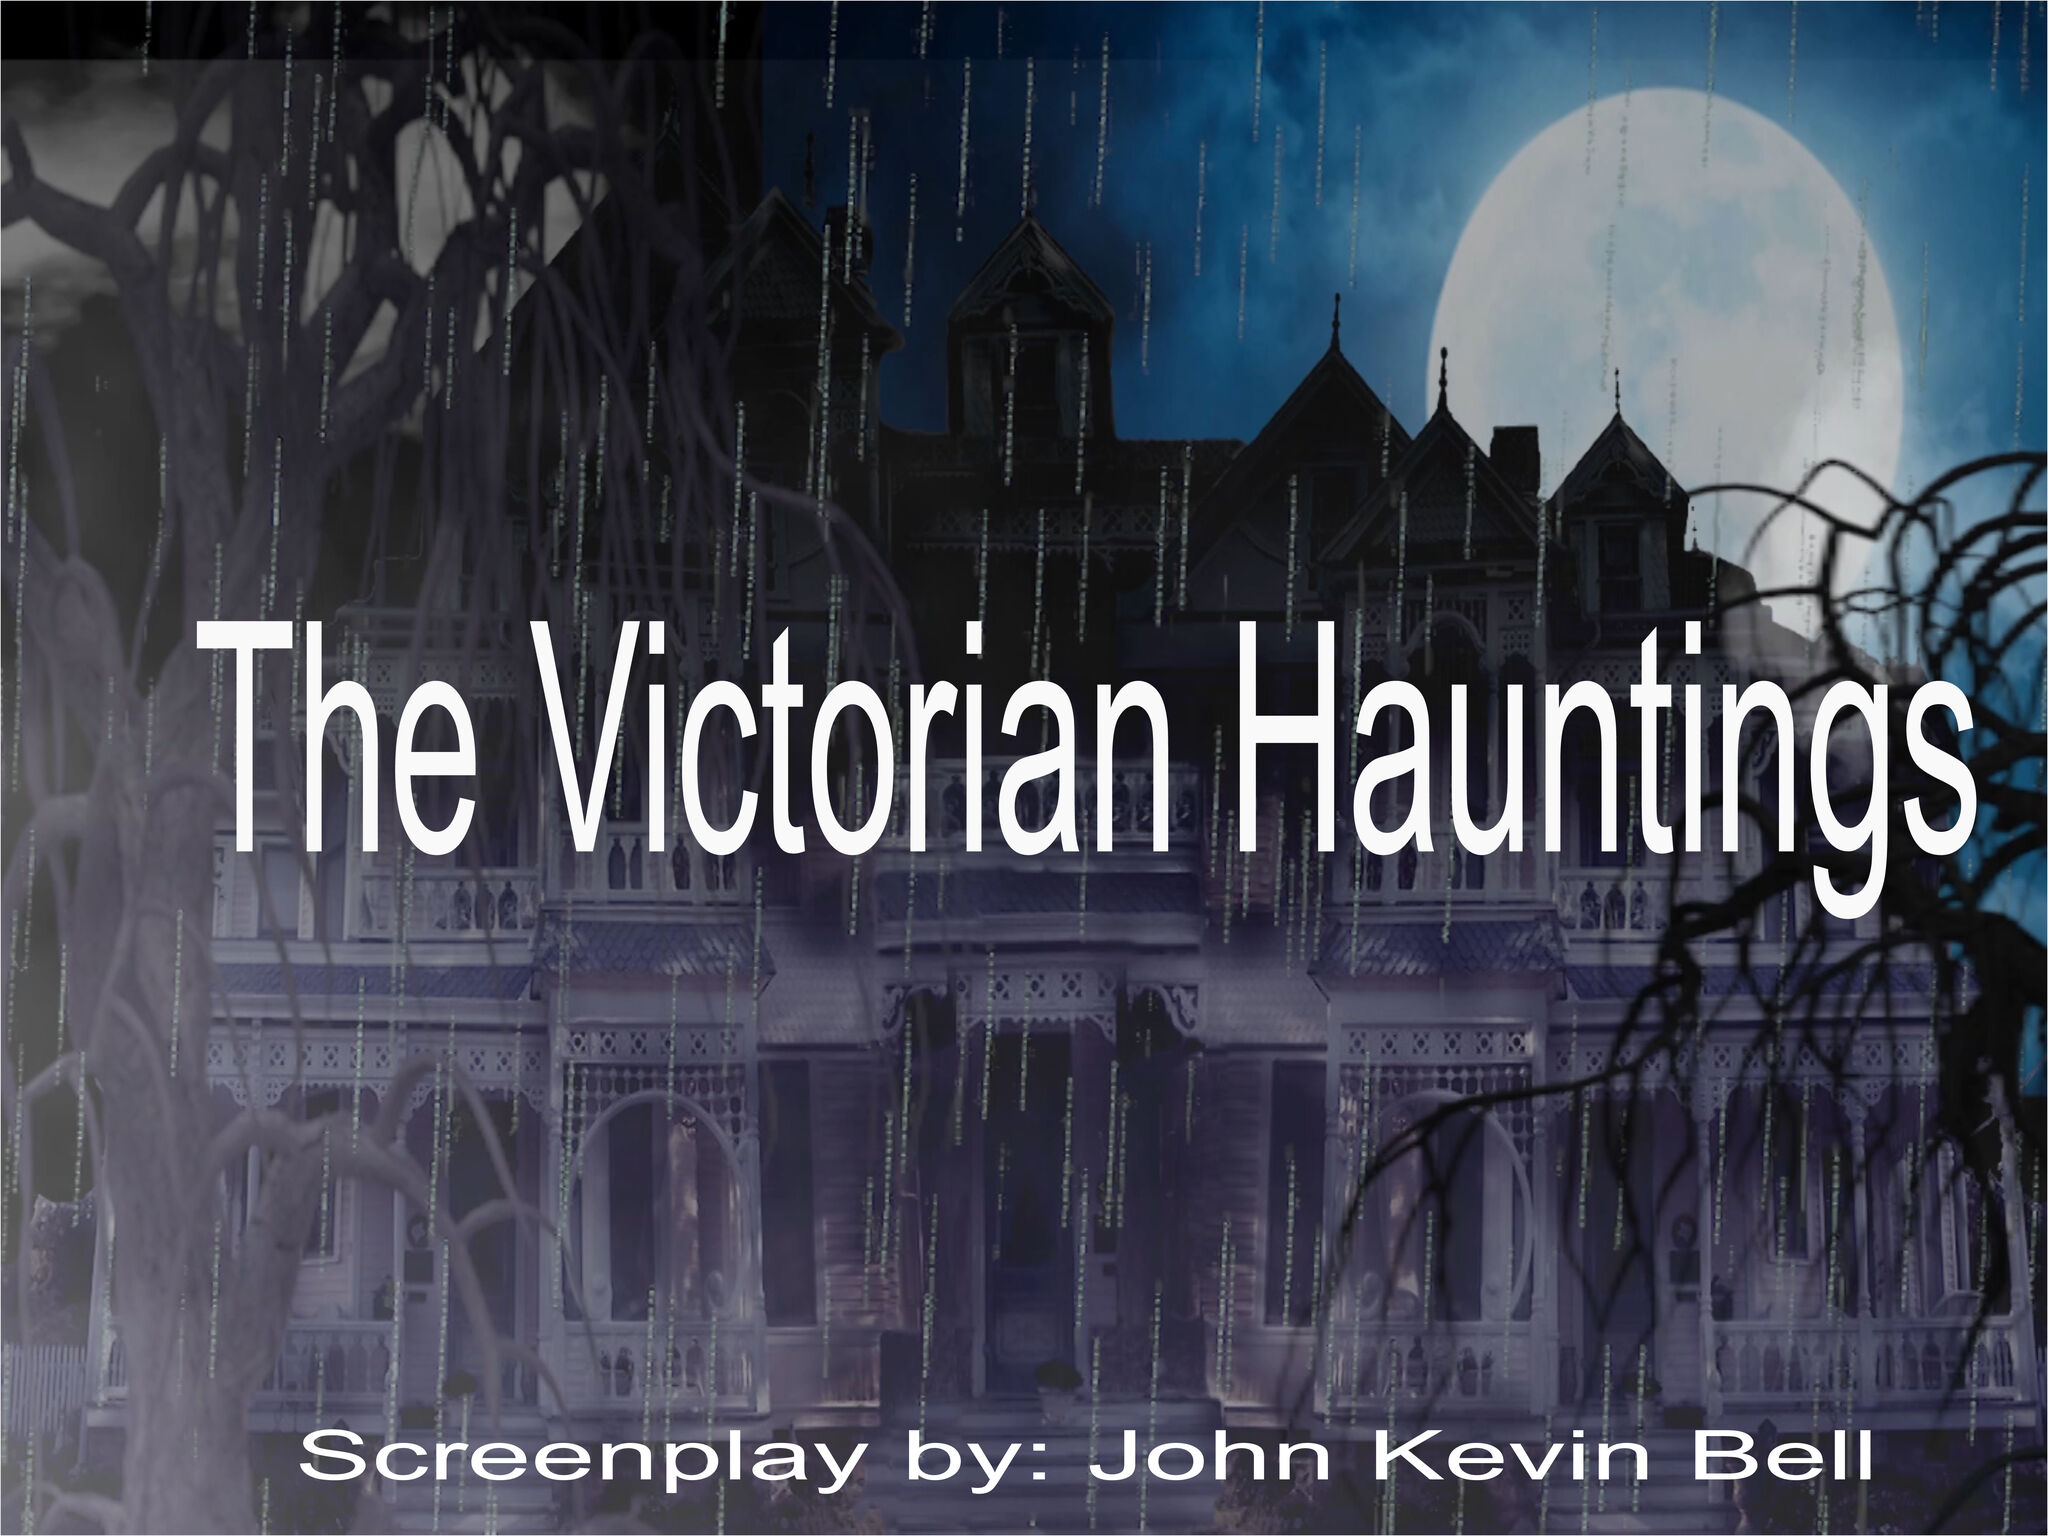 THE VICTORIAN HAUNTINGS